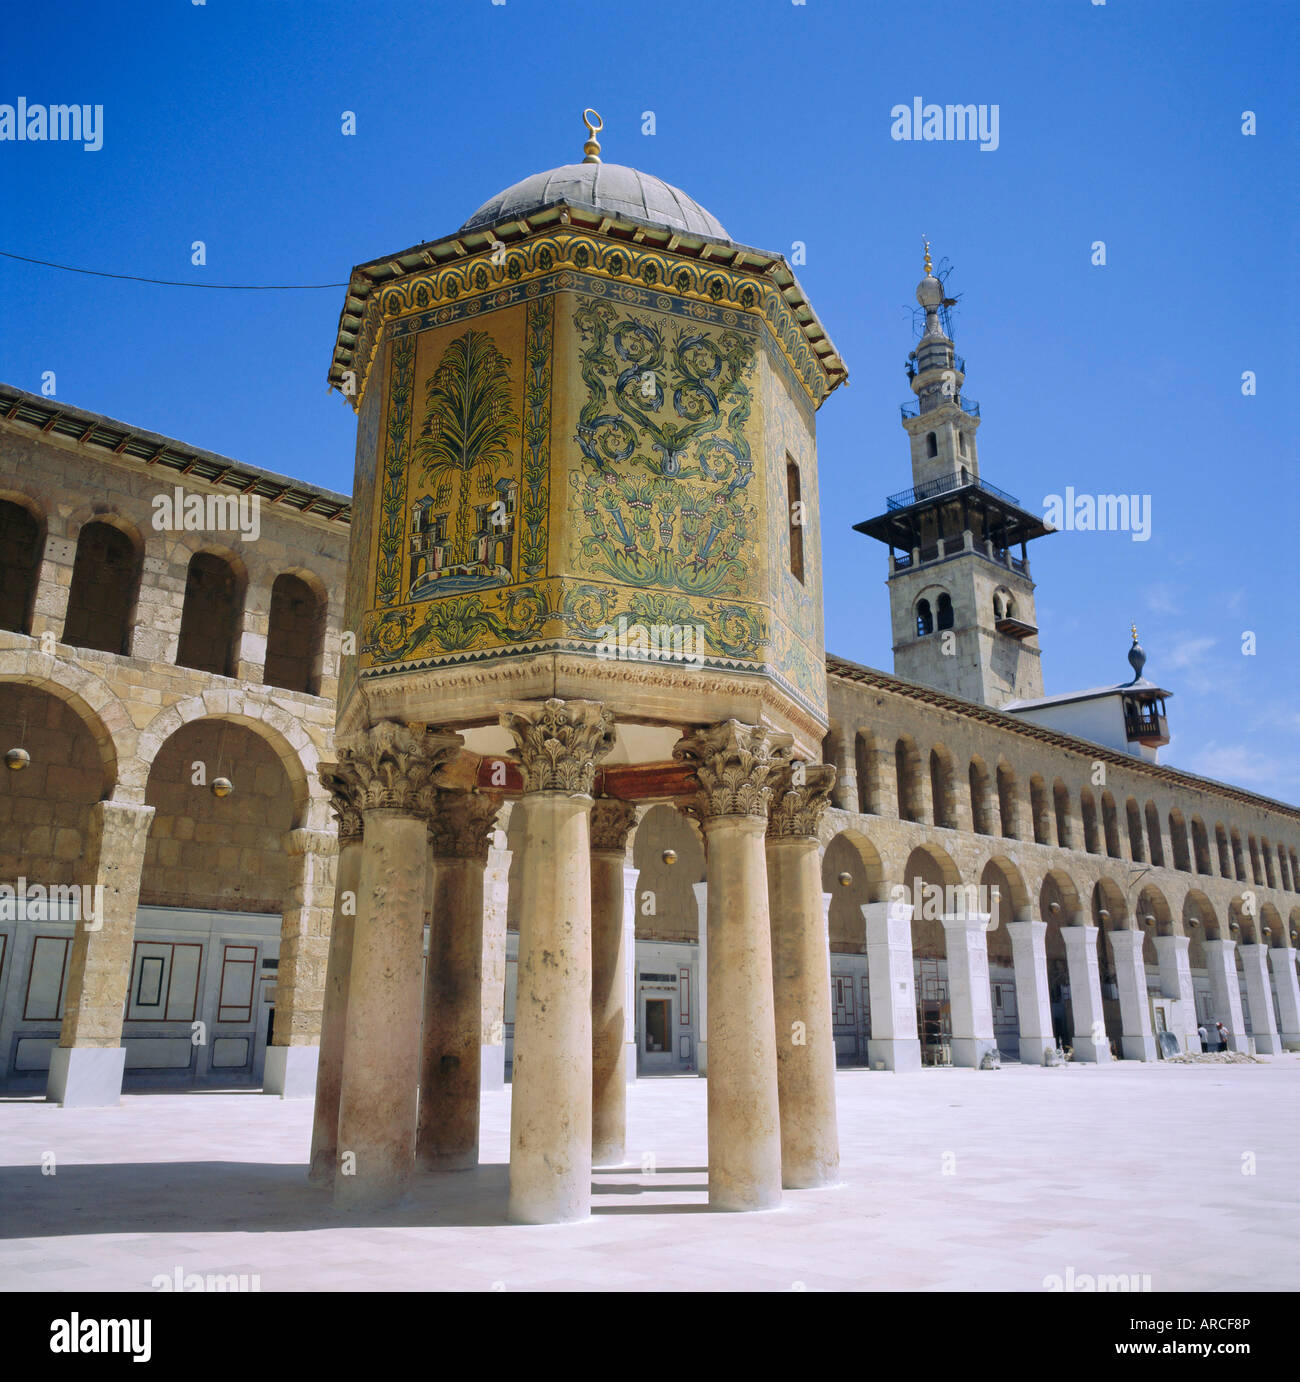 Omayyad Mosque, Treasury covered in mosaic, Damascus, Syria, Middle East Stock Photo